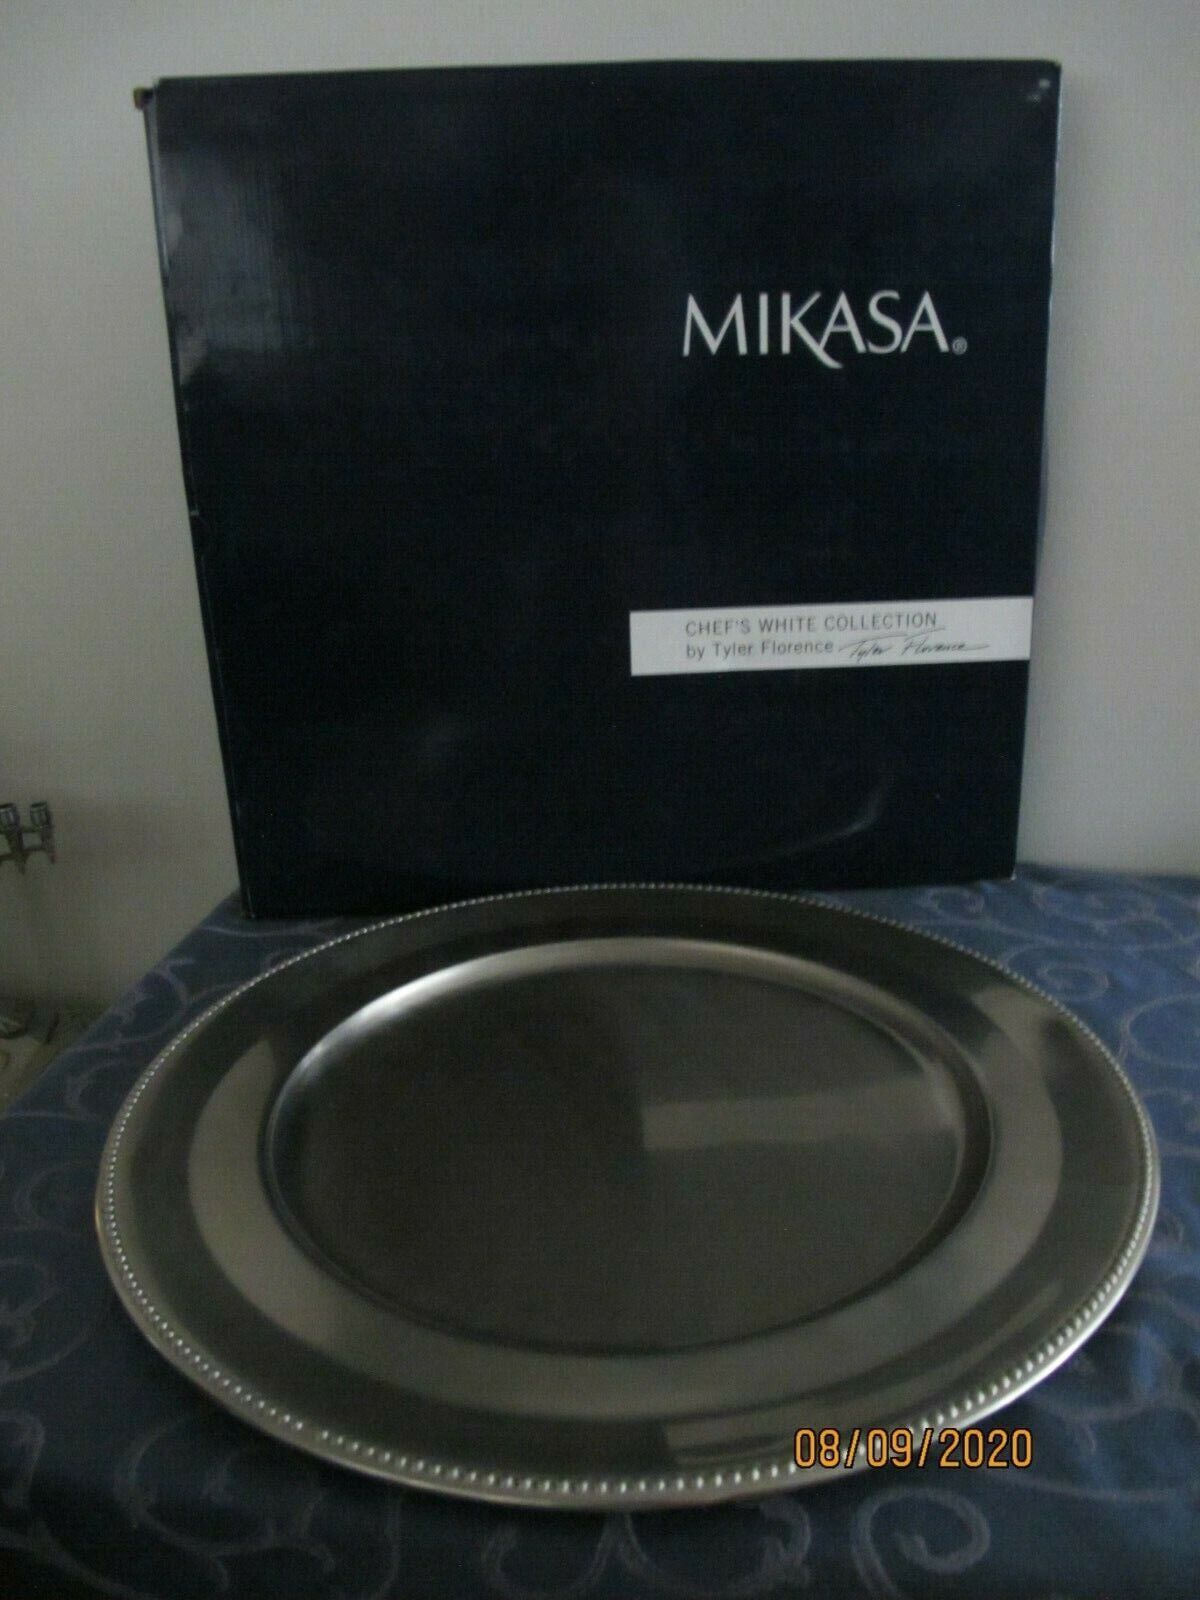 Tyler Florence by Mikasa Chef's White Collection Round Service Tray